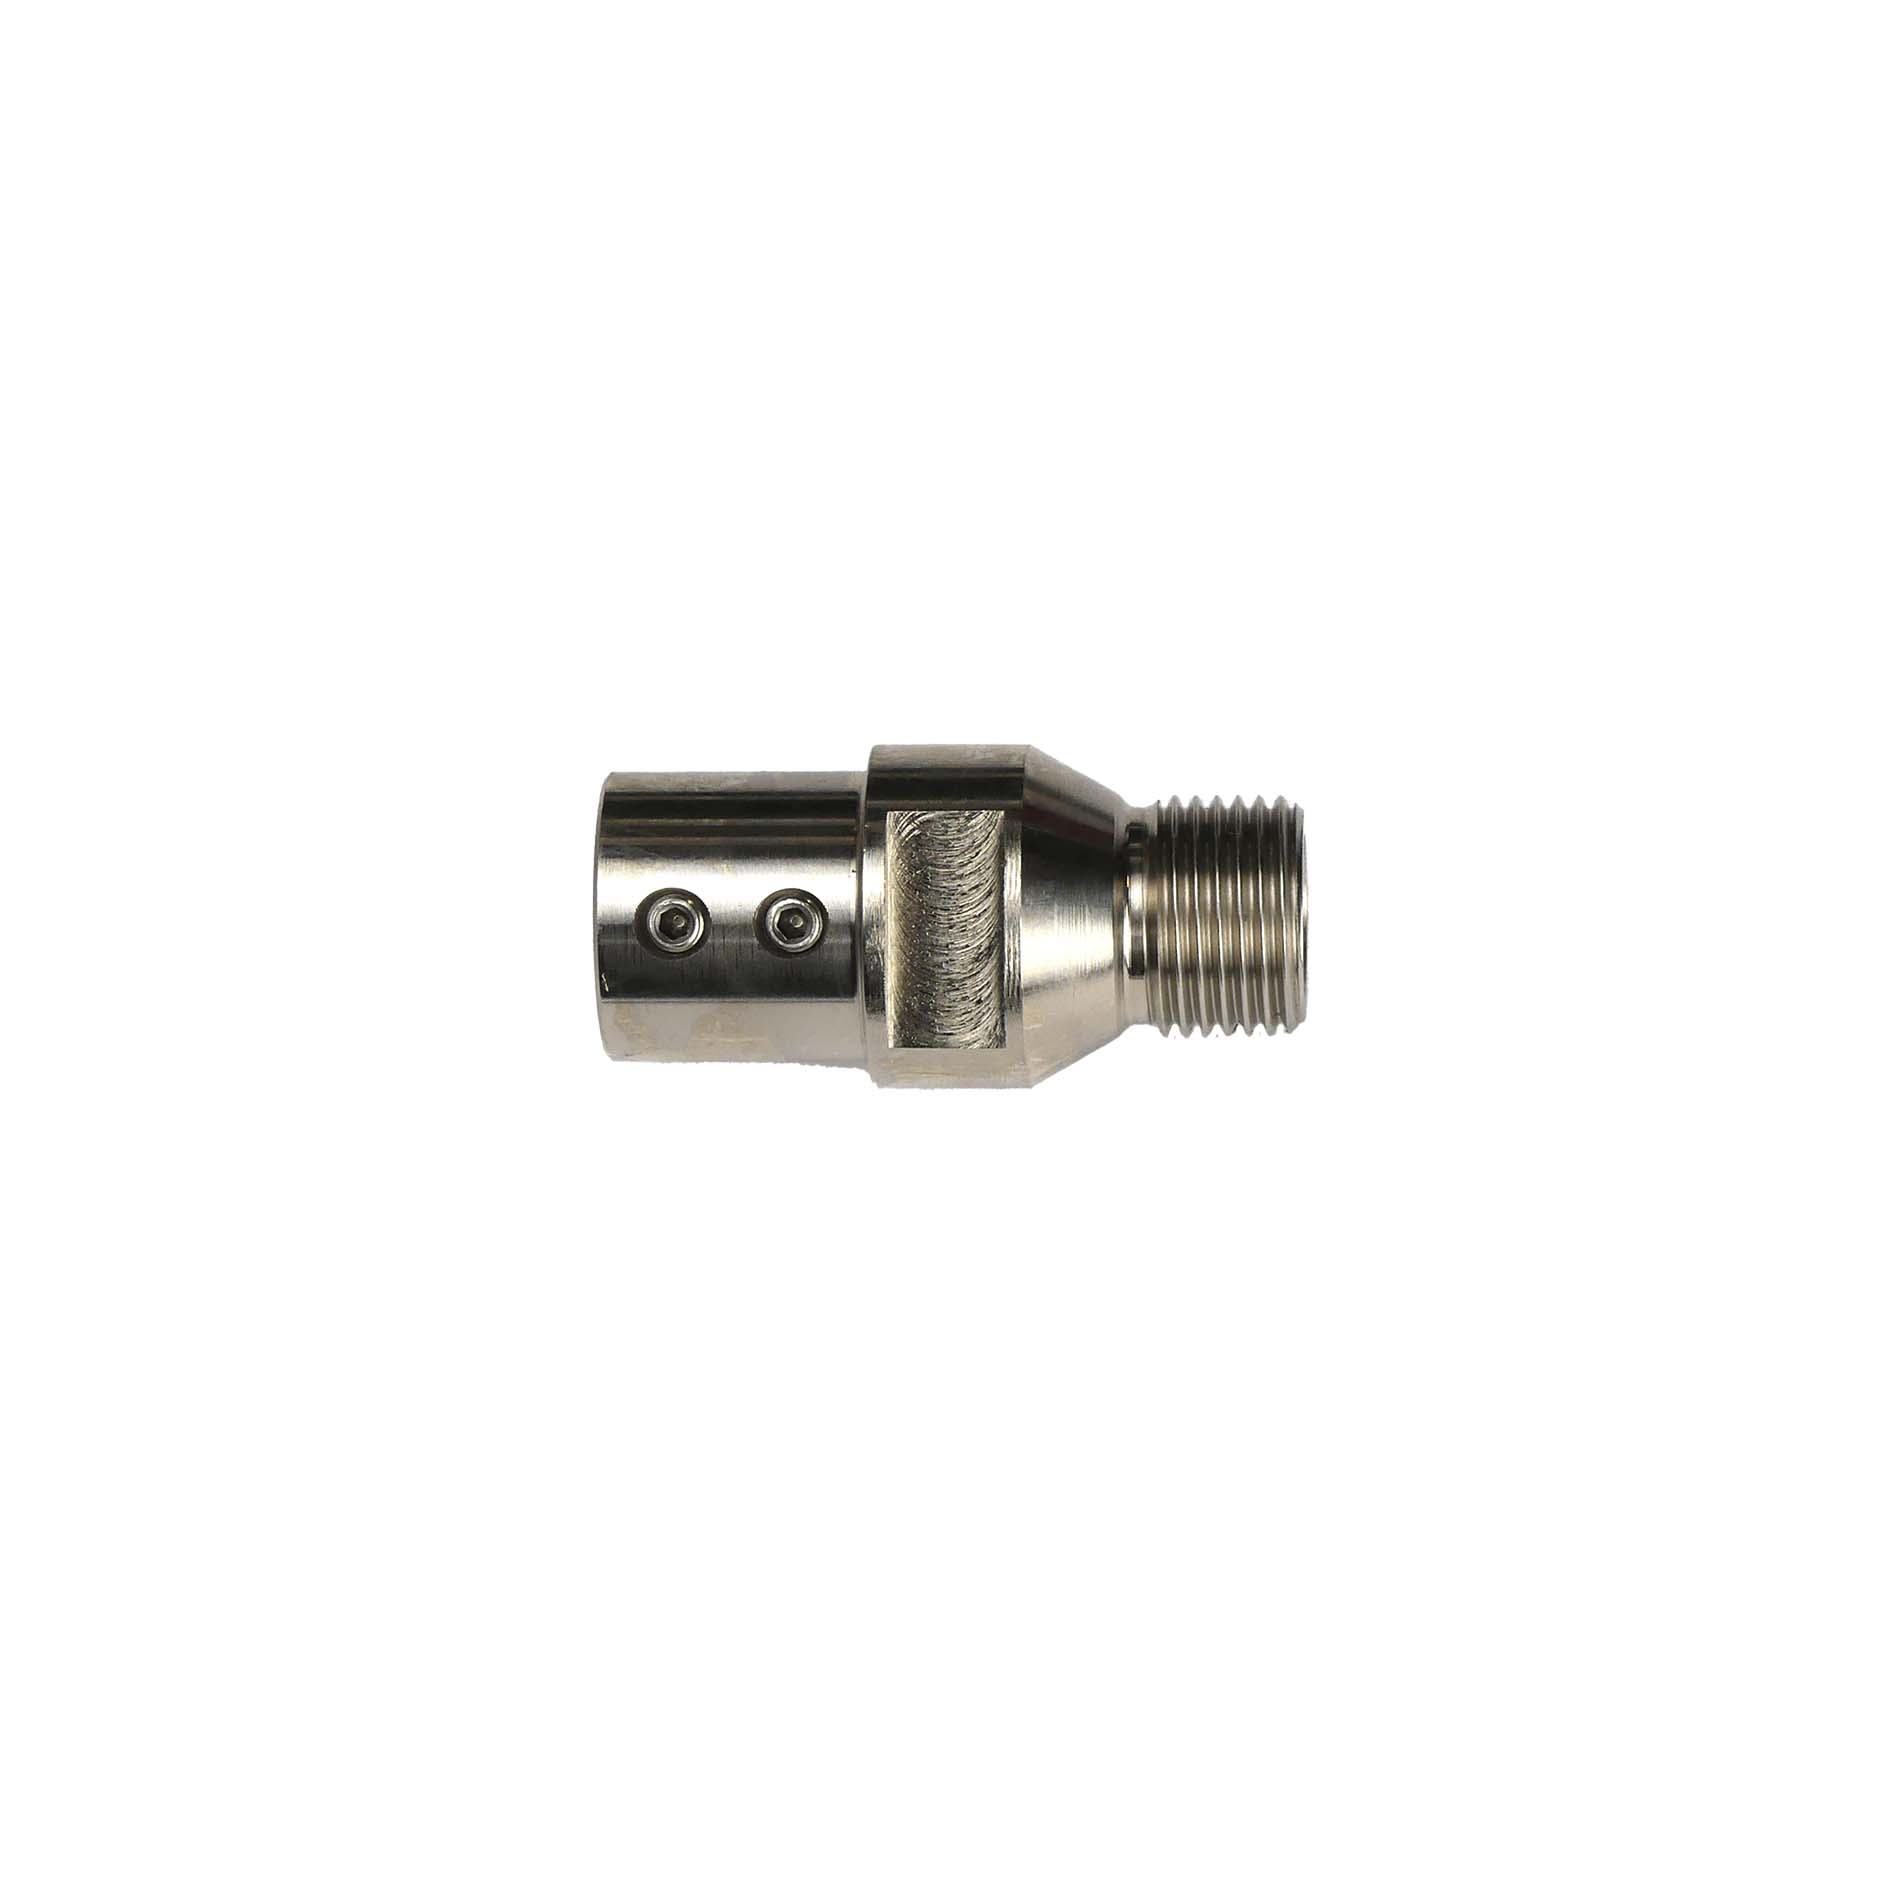 Adapter 1/2" - 6mm Cyl